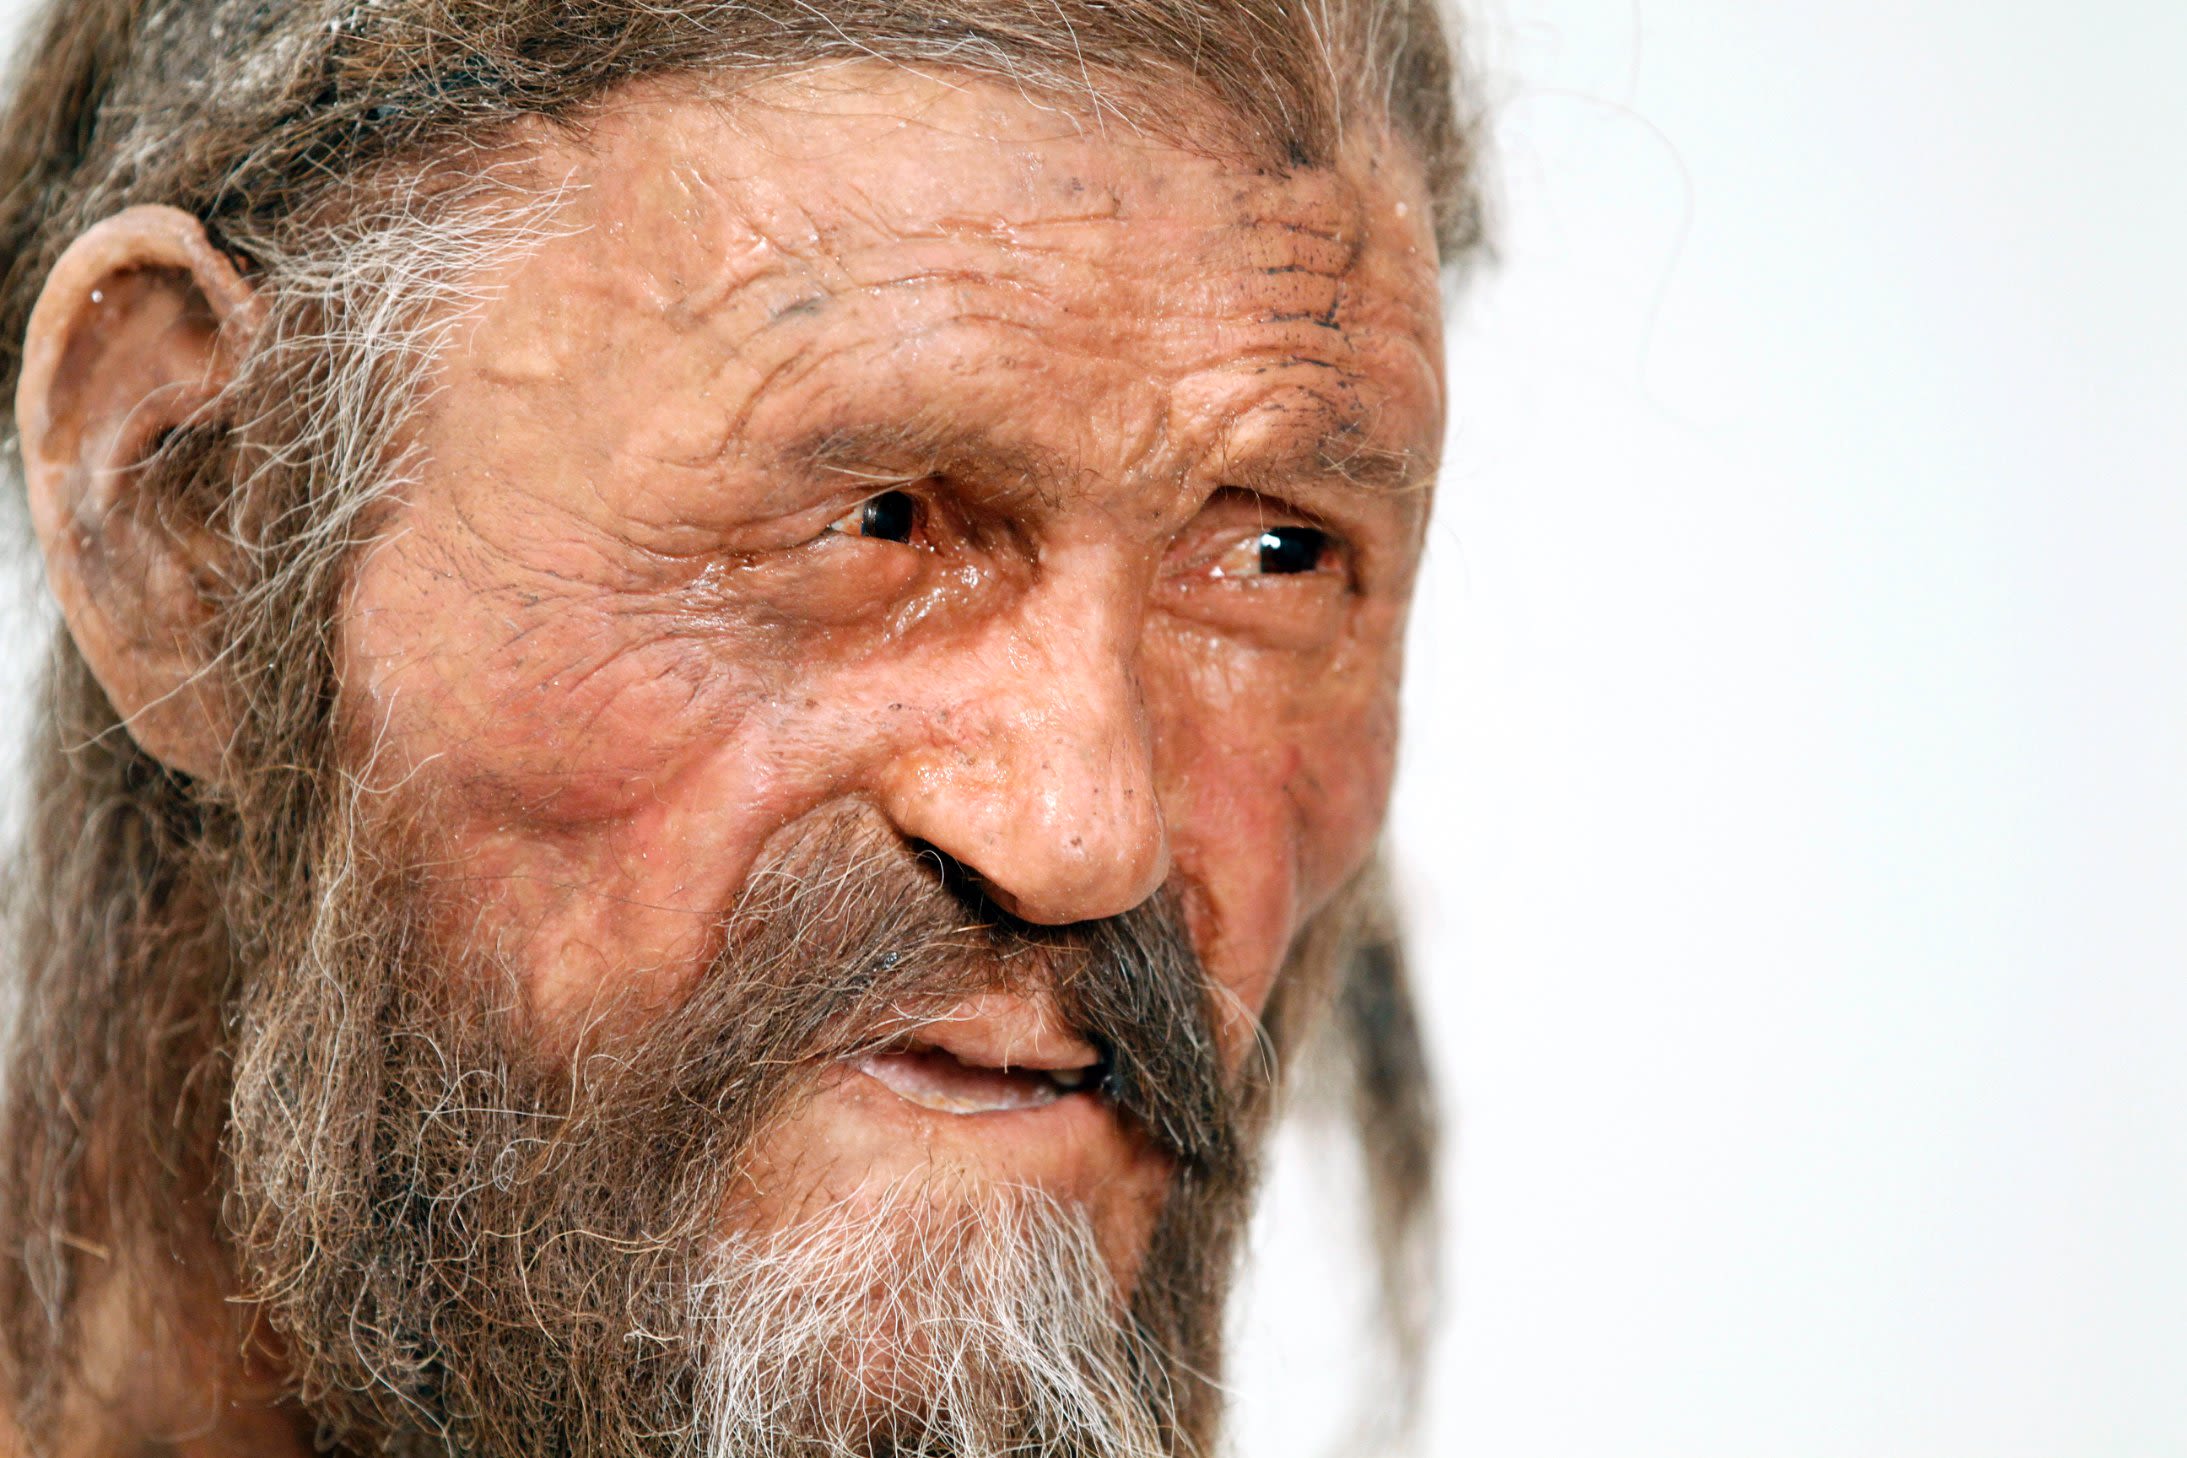 Ötzi the iceman: Up close and personal